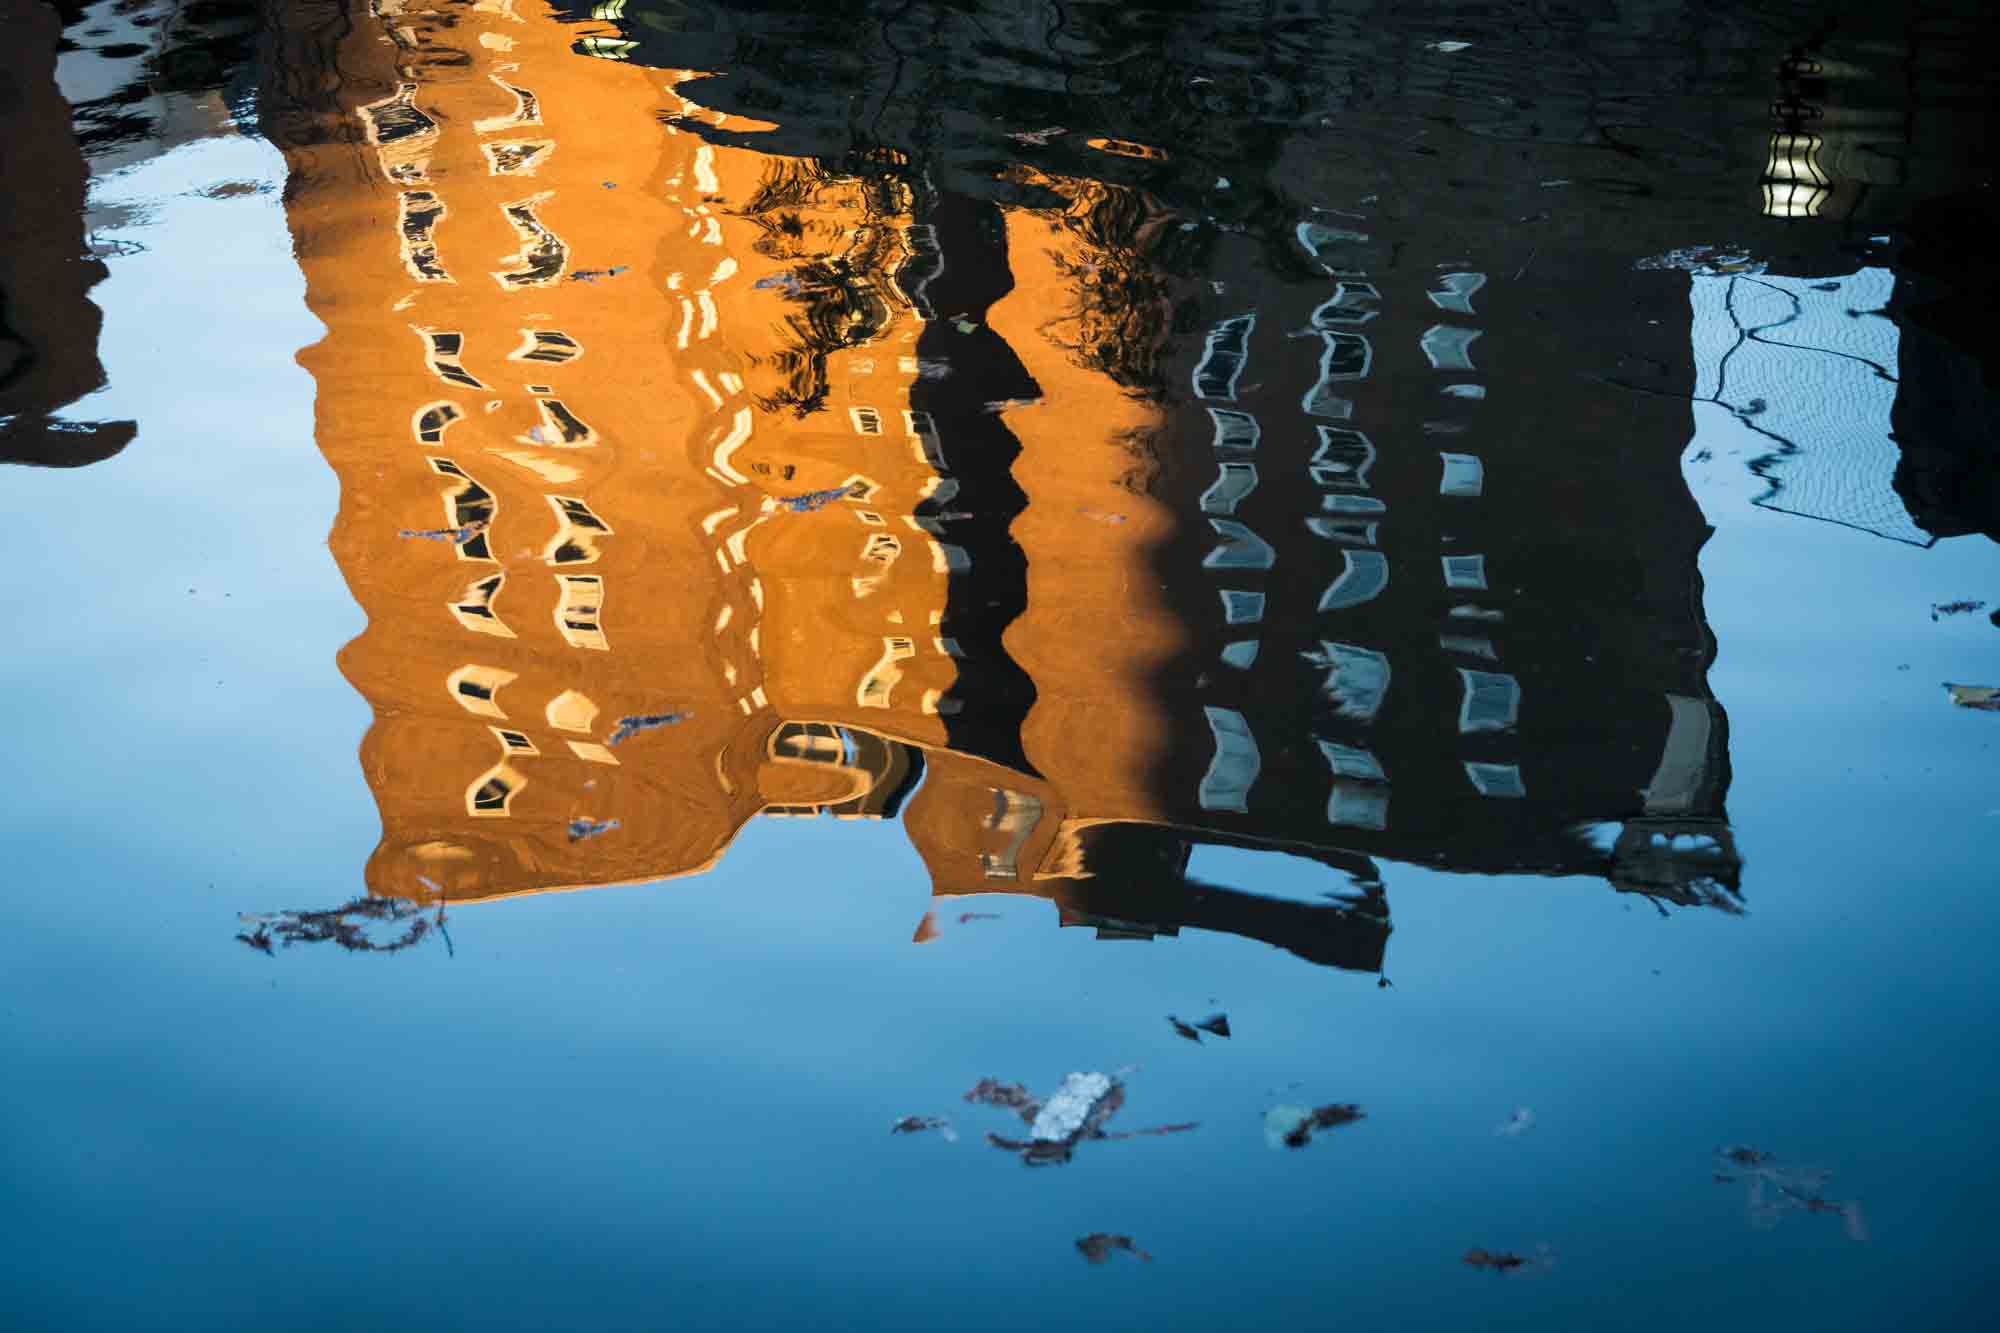 Reflection of building in river by San Antonio photographer, Kelly Williams